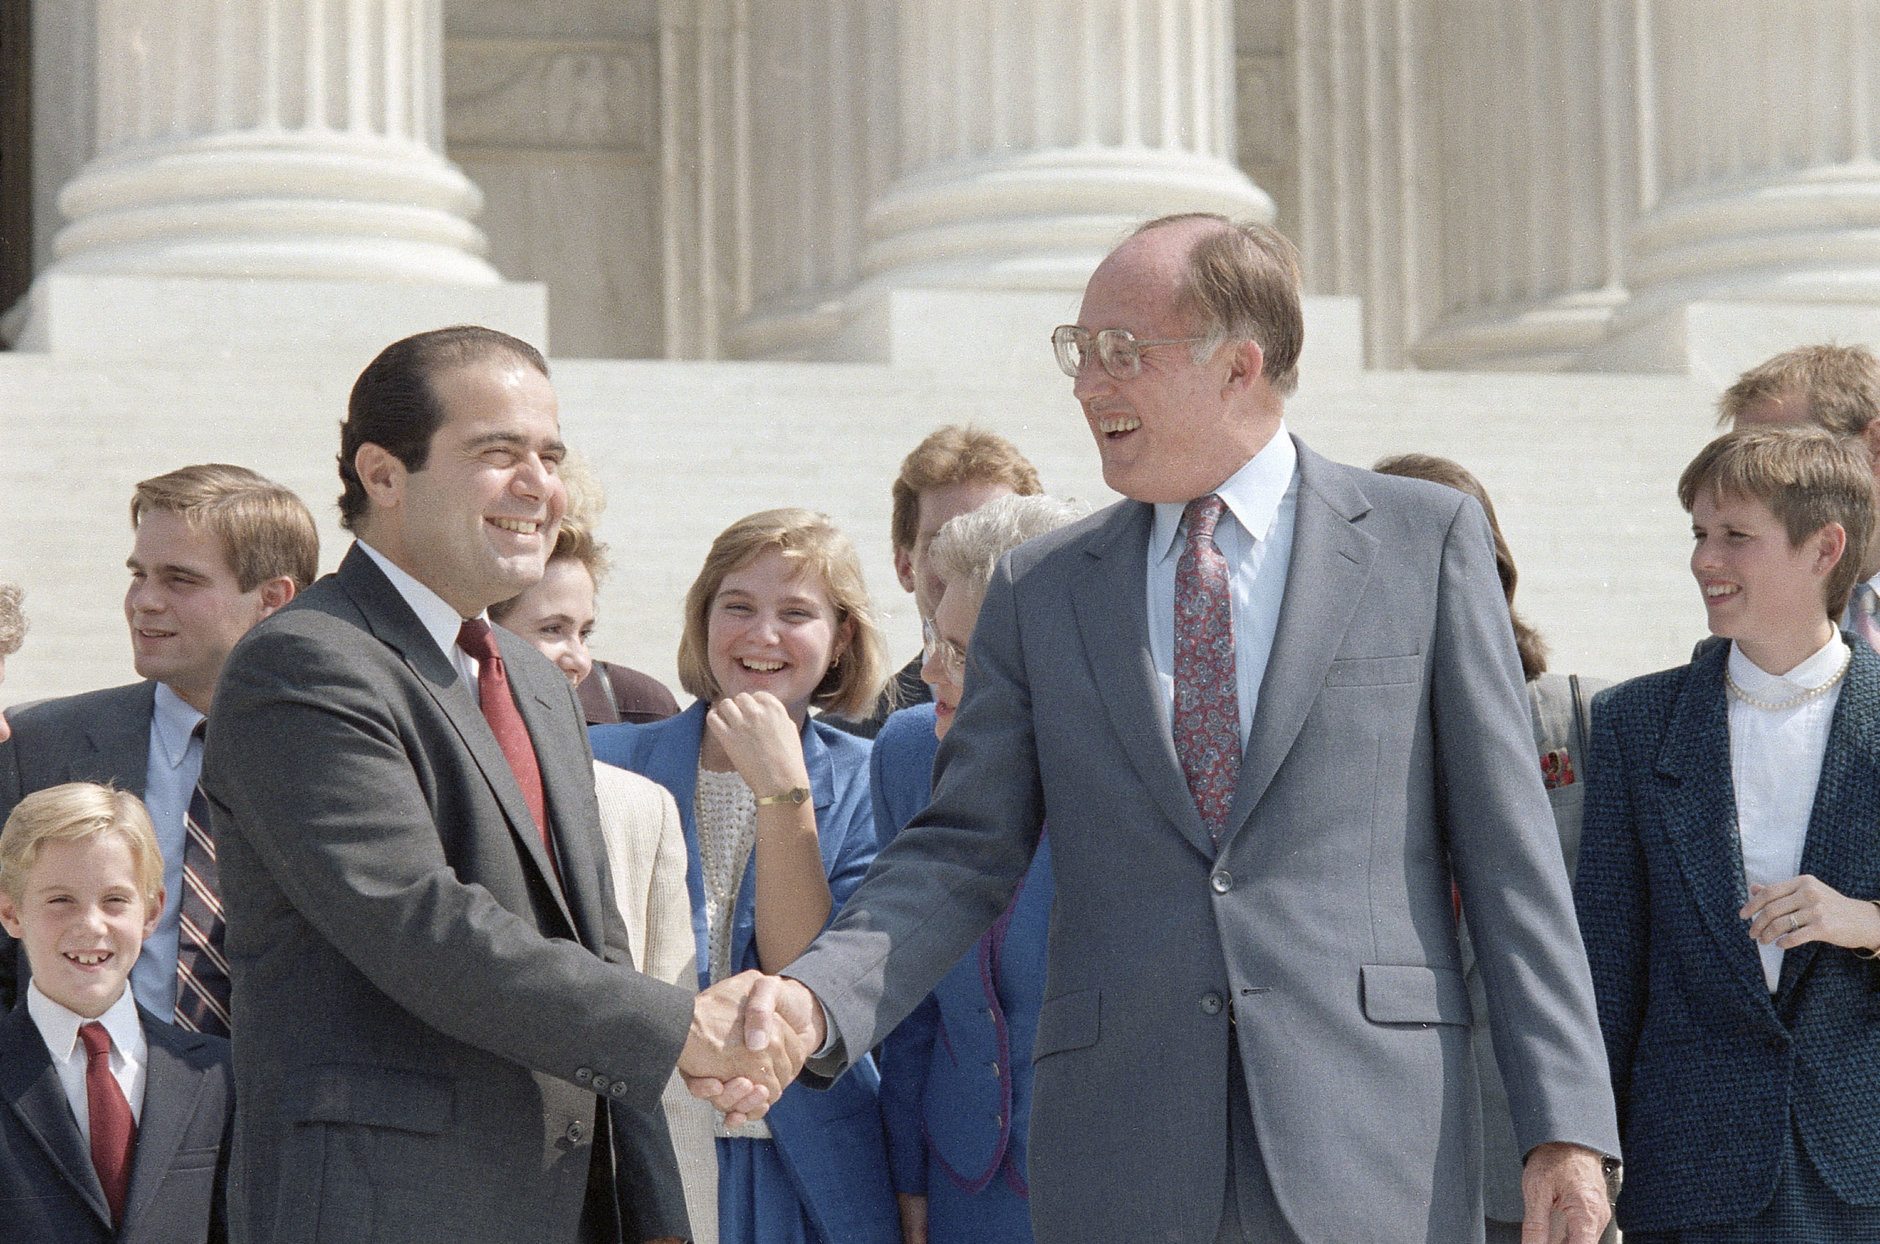 New Chief Justice of the Supreme Court William Rehnquist, right, shakes hands with the newest Associate Justice Antonin Scalia outside the Supreme Court Building in Washington, Sept. 26, 1986.  Rehnquist is the 16th chief justice and Scalia is the 103rd person to sit on the court.  (AP Photo/Barry Thumma)